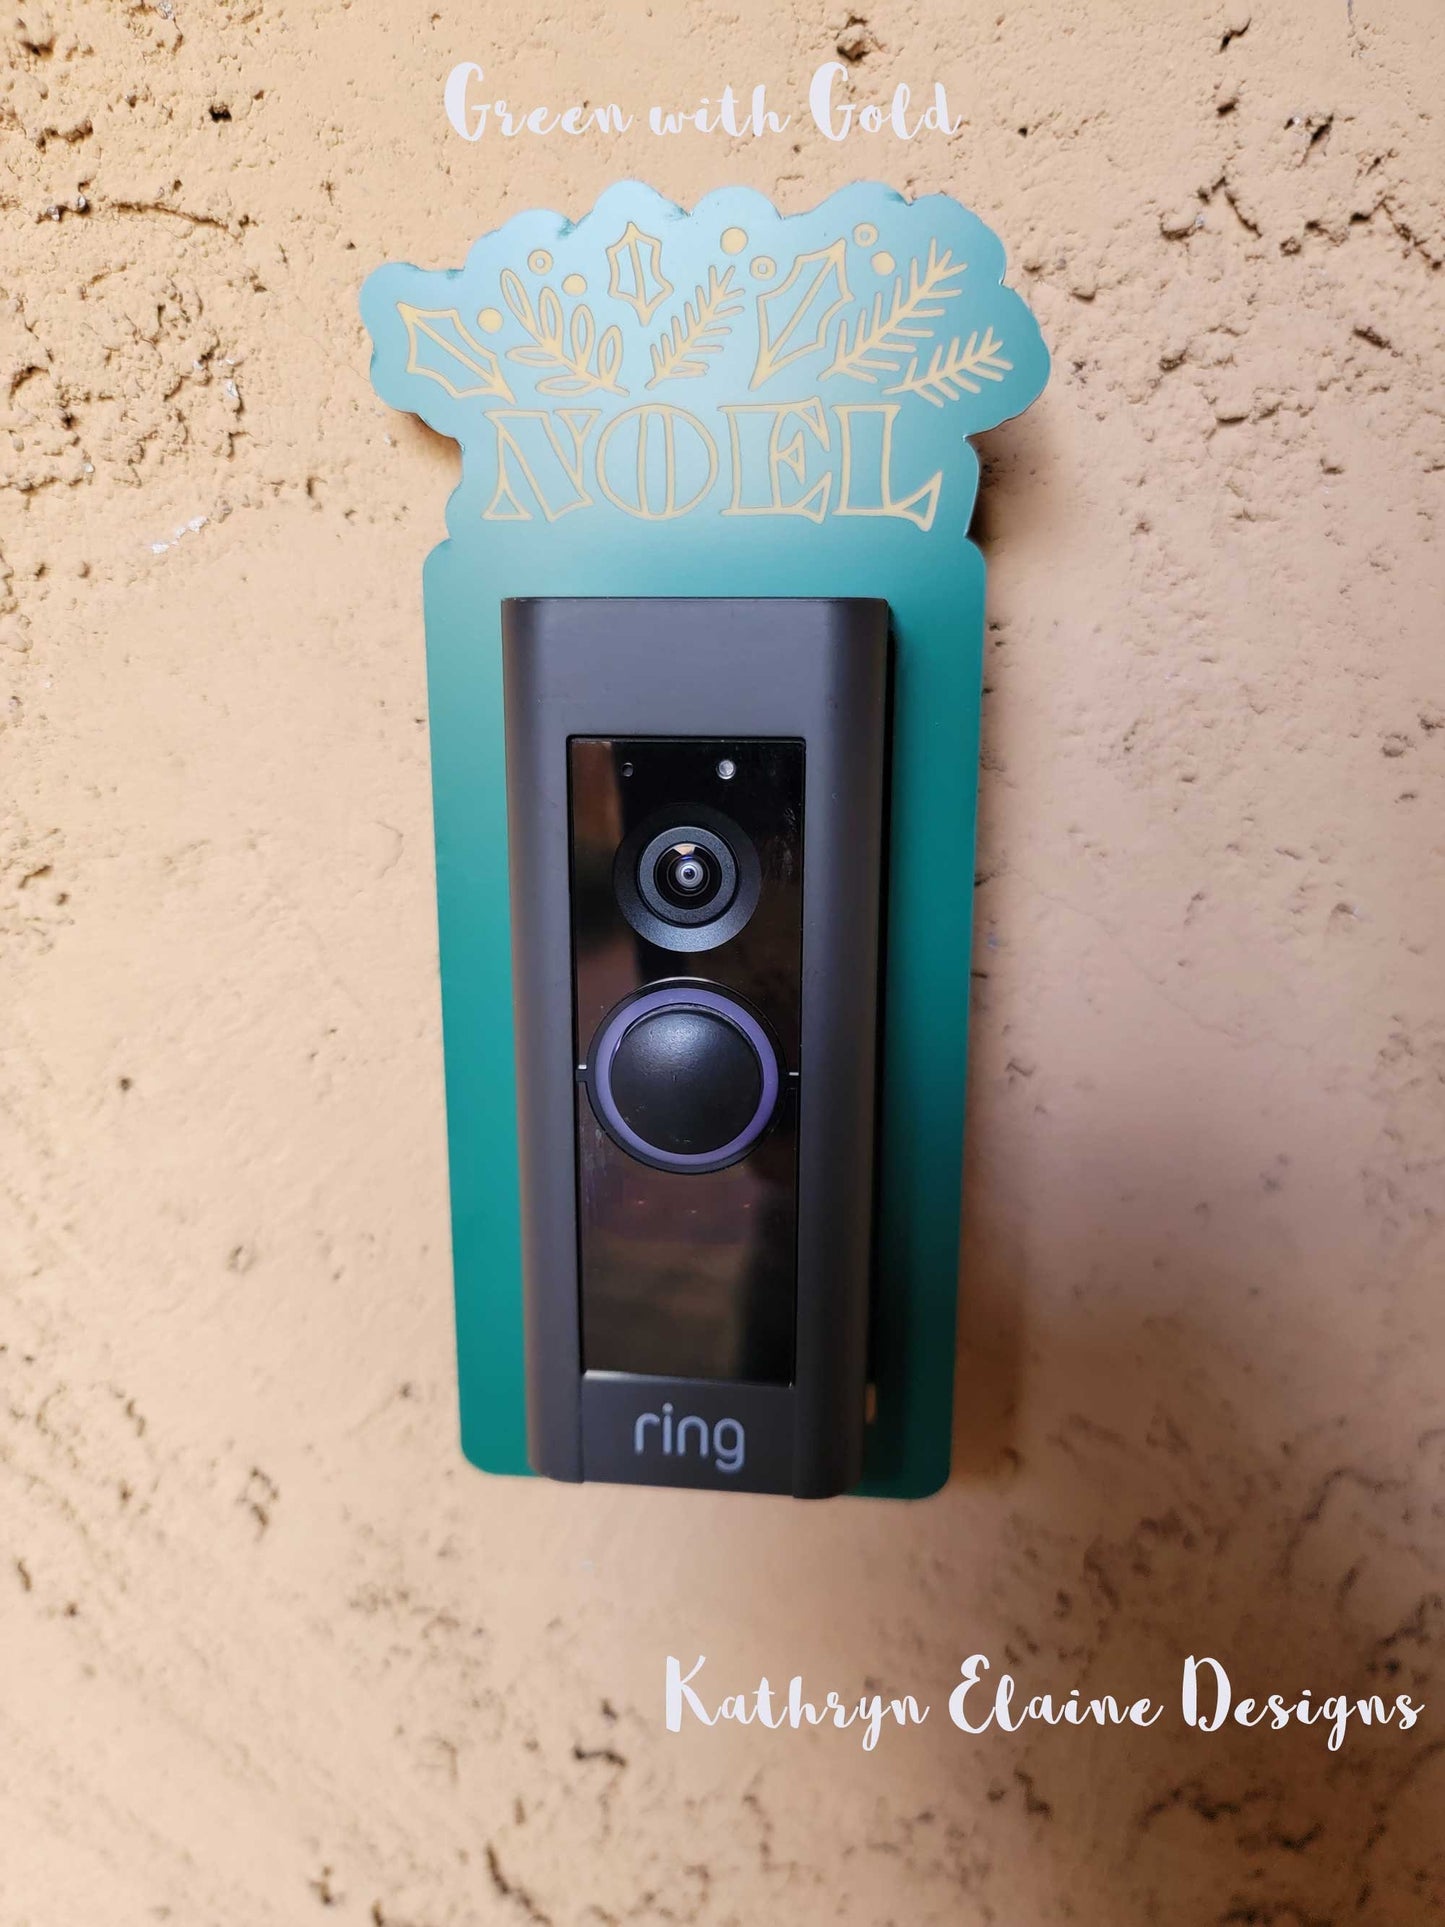 Green laminate doorbell surround with golden lettering saying Noel and holly, leaf design around ring doorbell on tan background.